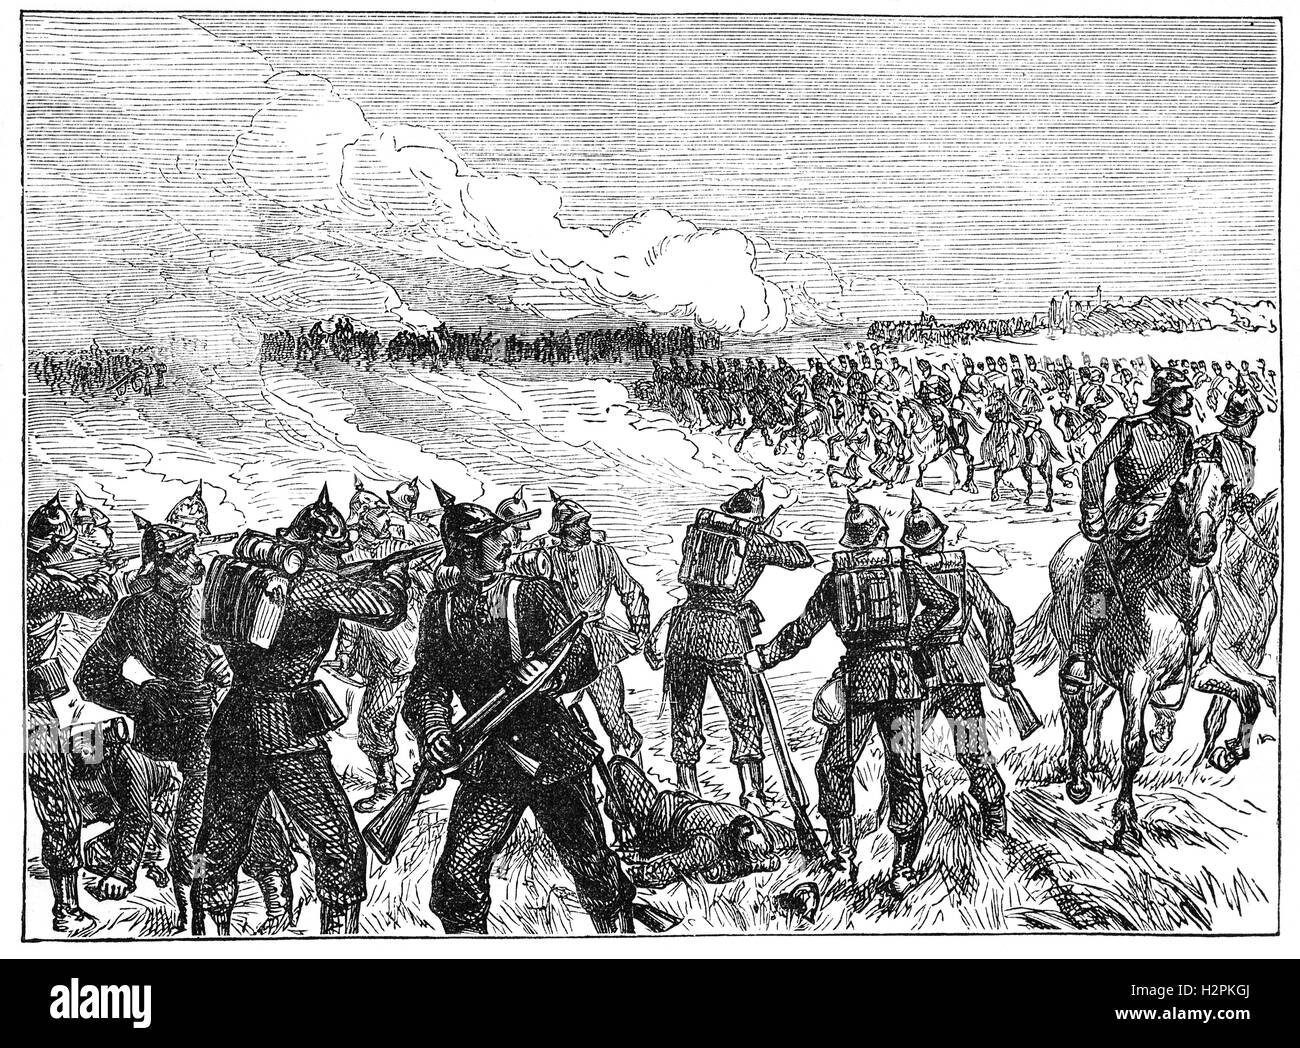 The Battle of Langensalza was fought on 27 June 1866  between the Kingdom of Hanover and the Prussians. The Hanoverians won the battle but were  surrounded by a larger and reinforced Prussian army, and  unable to link up with their Bavarian allies to the south, they surrendered. This marked the annexation of Hanover into the  kingdom of Prussia as it systematically unified Germany into the modern nation state. Stock Photo